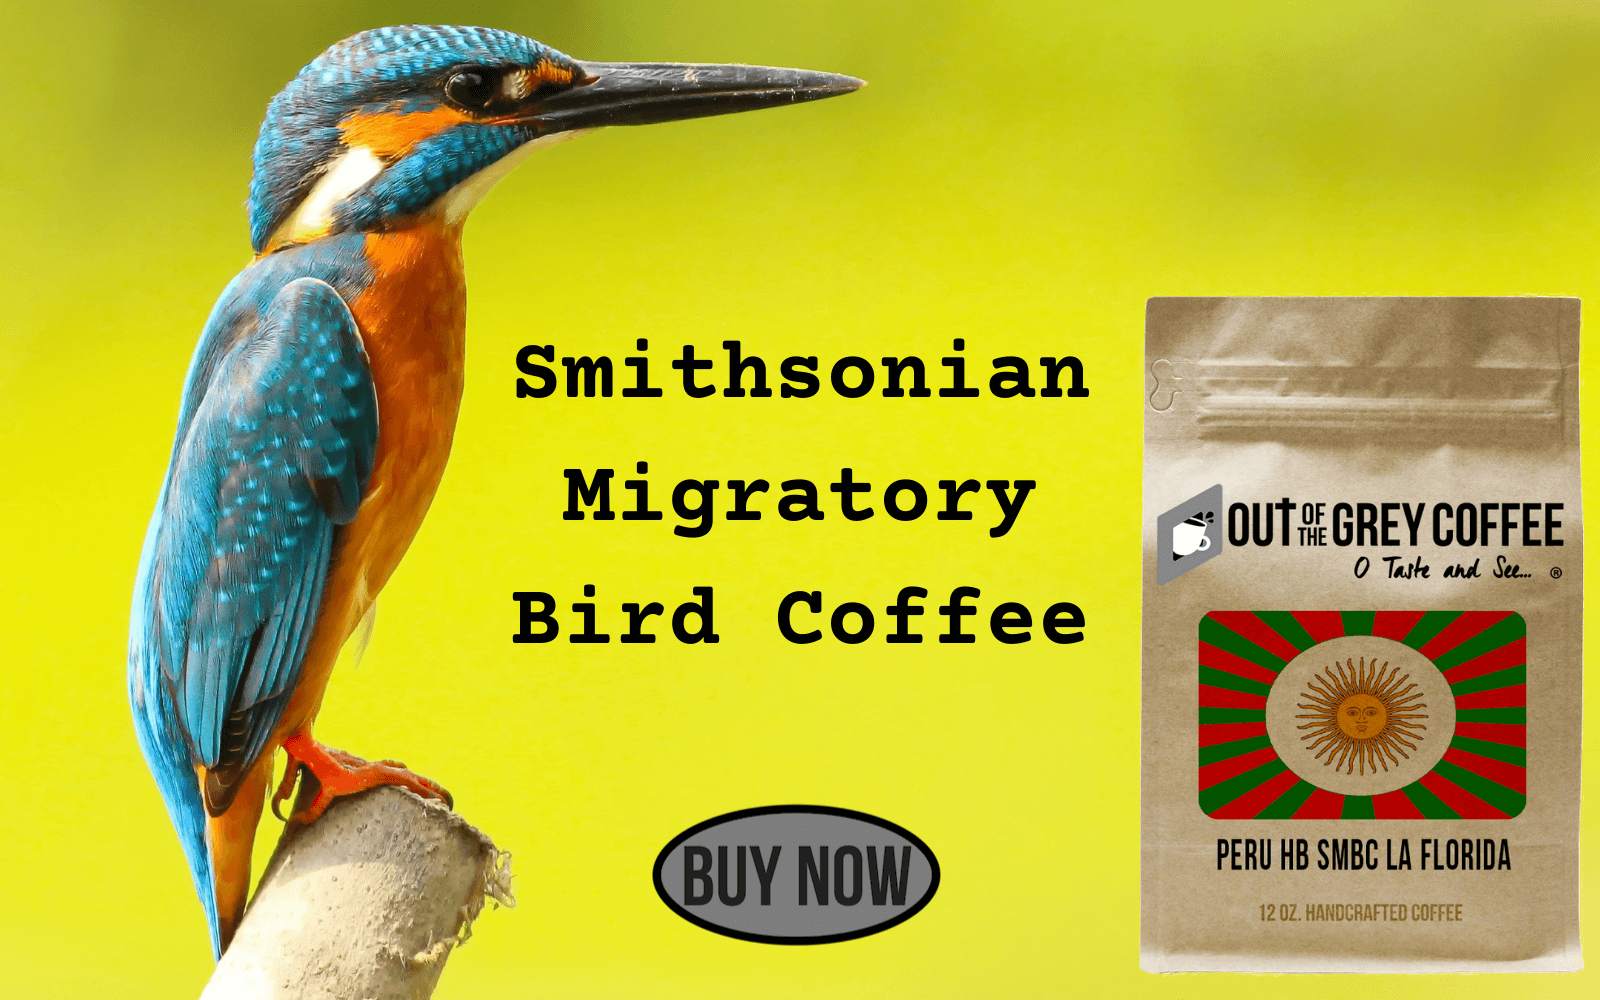 Smithsonian migratory bird coffees offered by Out Of The Grey Coffee